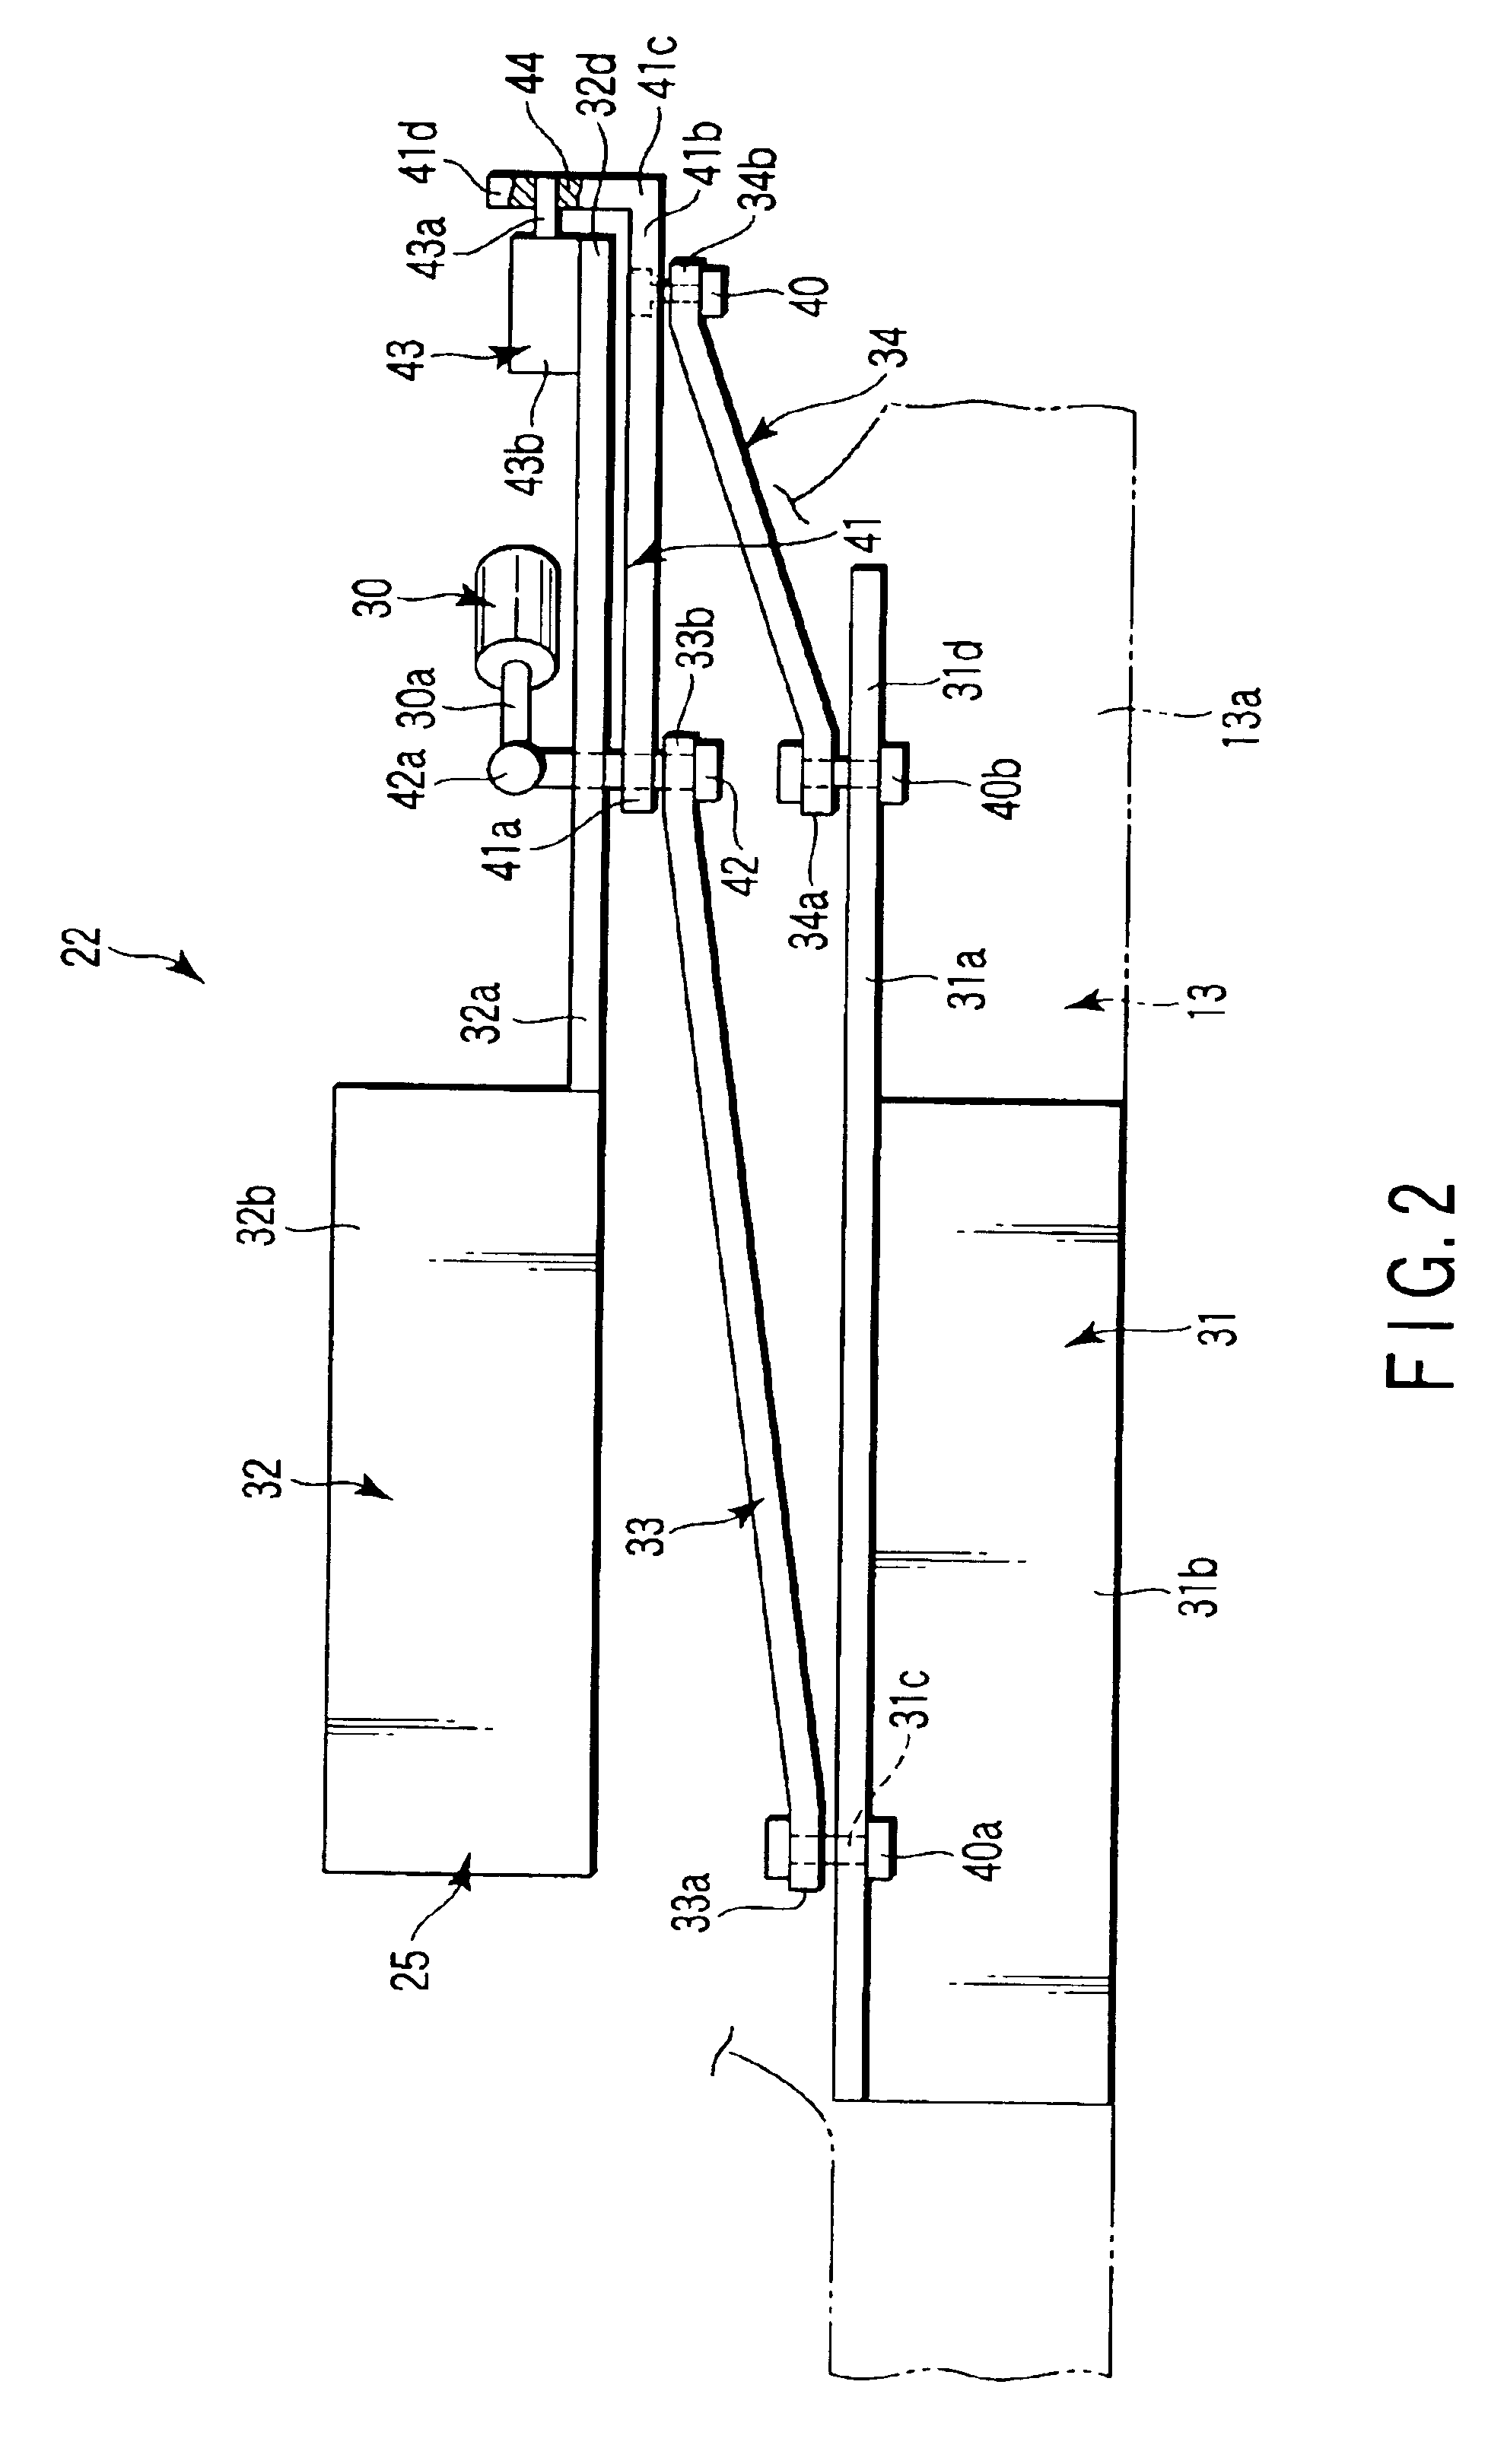 Hood apparatus for a vehicle